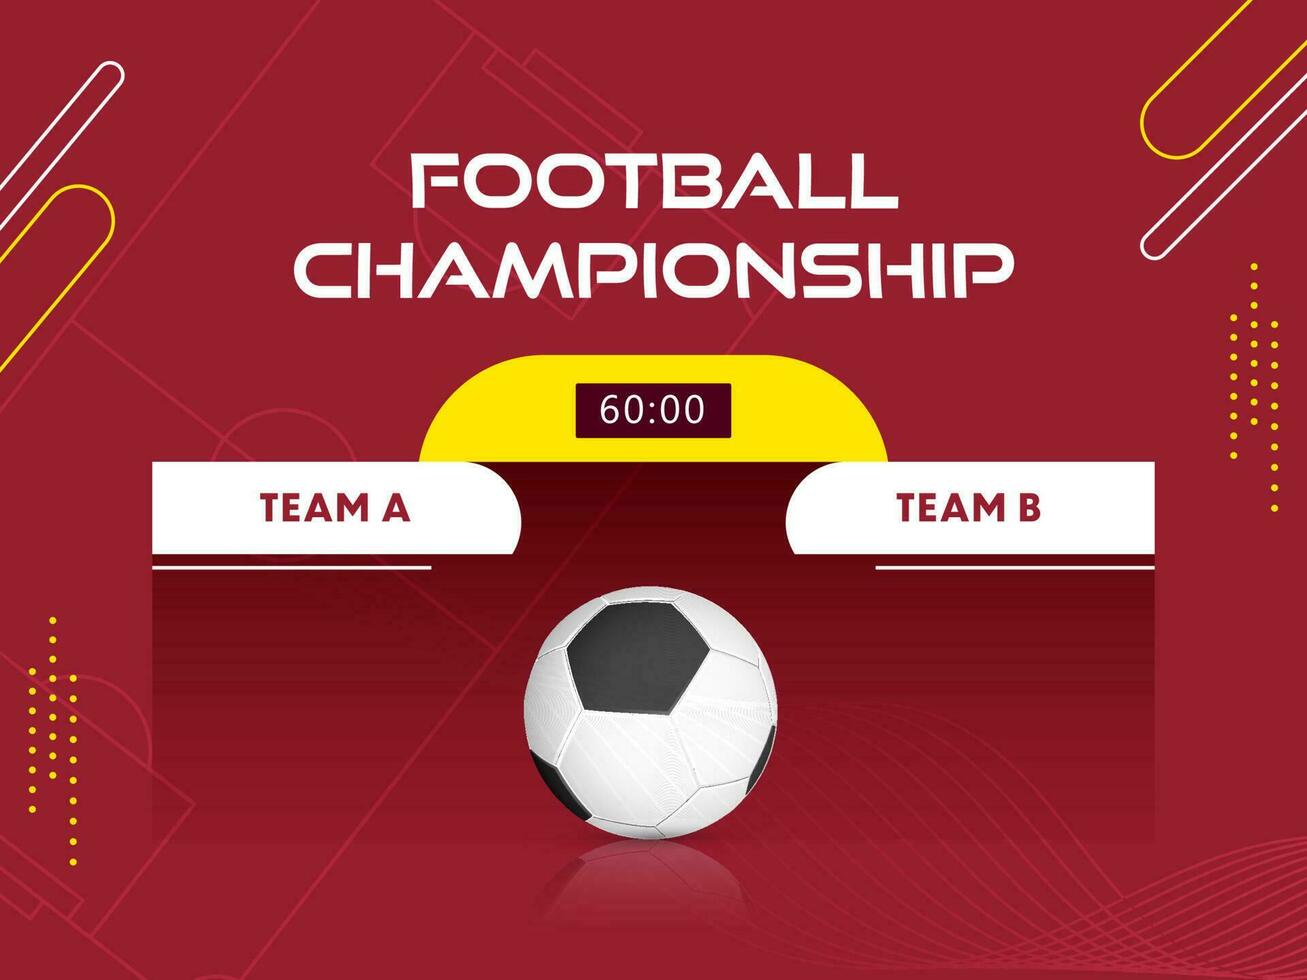 Football Championship Match Between Team A VS B With Soccer Ball On Red Pitch Background. vector